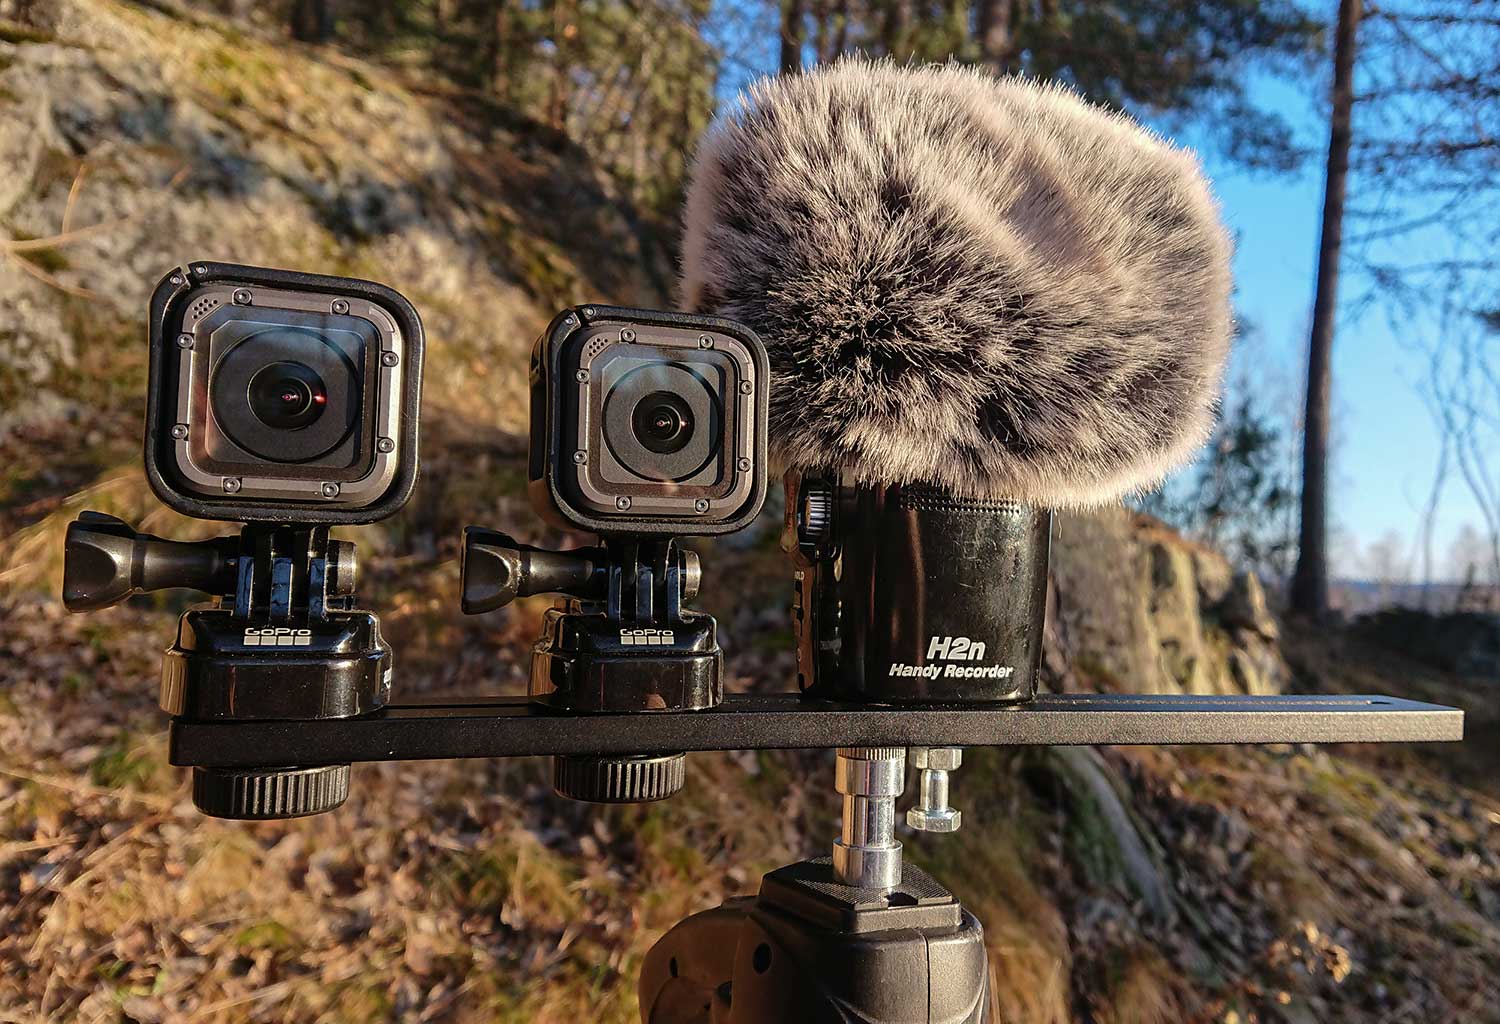 VR120 setup with two GoPro Hero5 cameras and Zoom H2N in spatial audio mode.